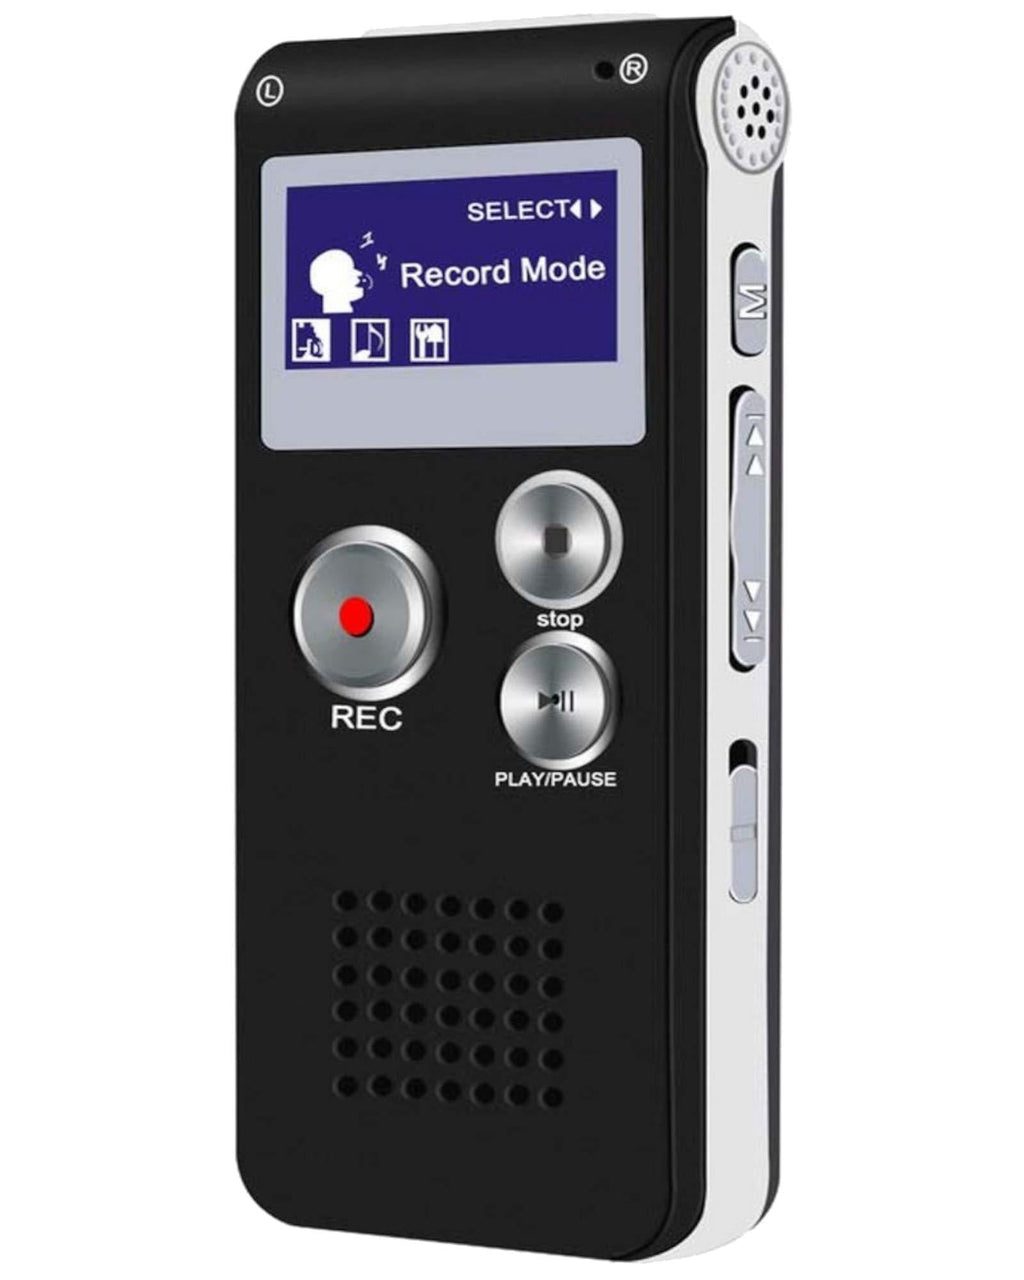  [AUSTRALIA] - Digital Voice Recorder Meeting 8G - Easy to Use, Clear Recording with Playback - Voice Activated Recorder - Digital Audio Recorder for Lectures, Handheld Recording Device, Grabadora de Voz Digital